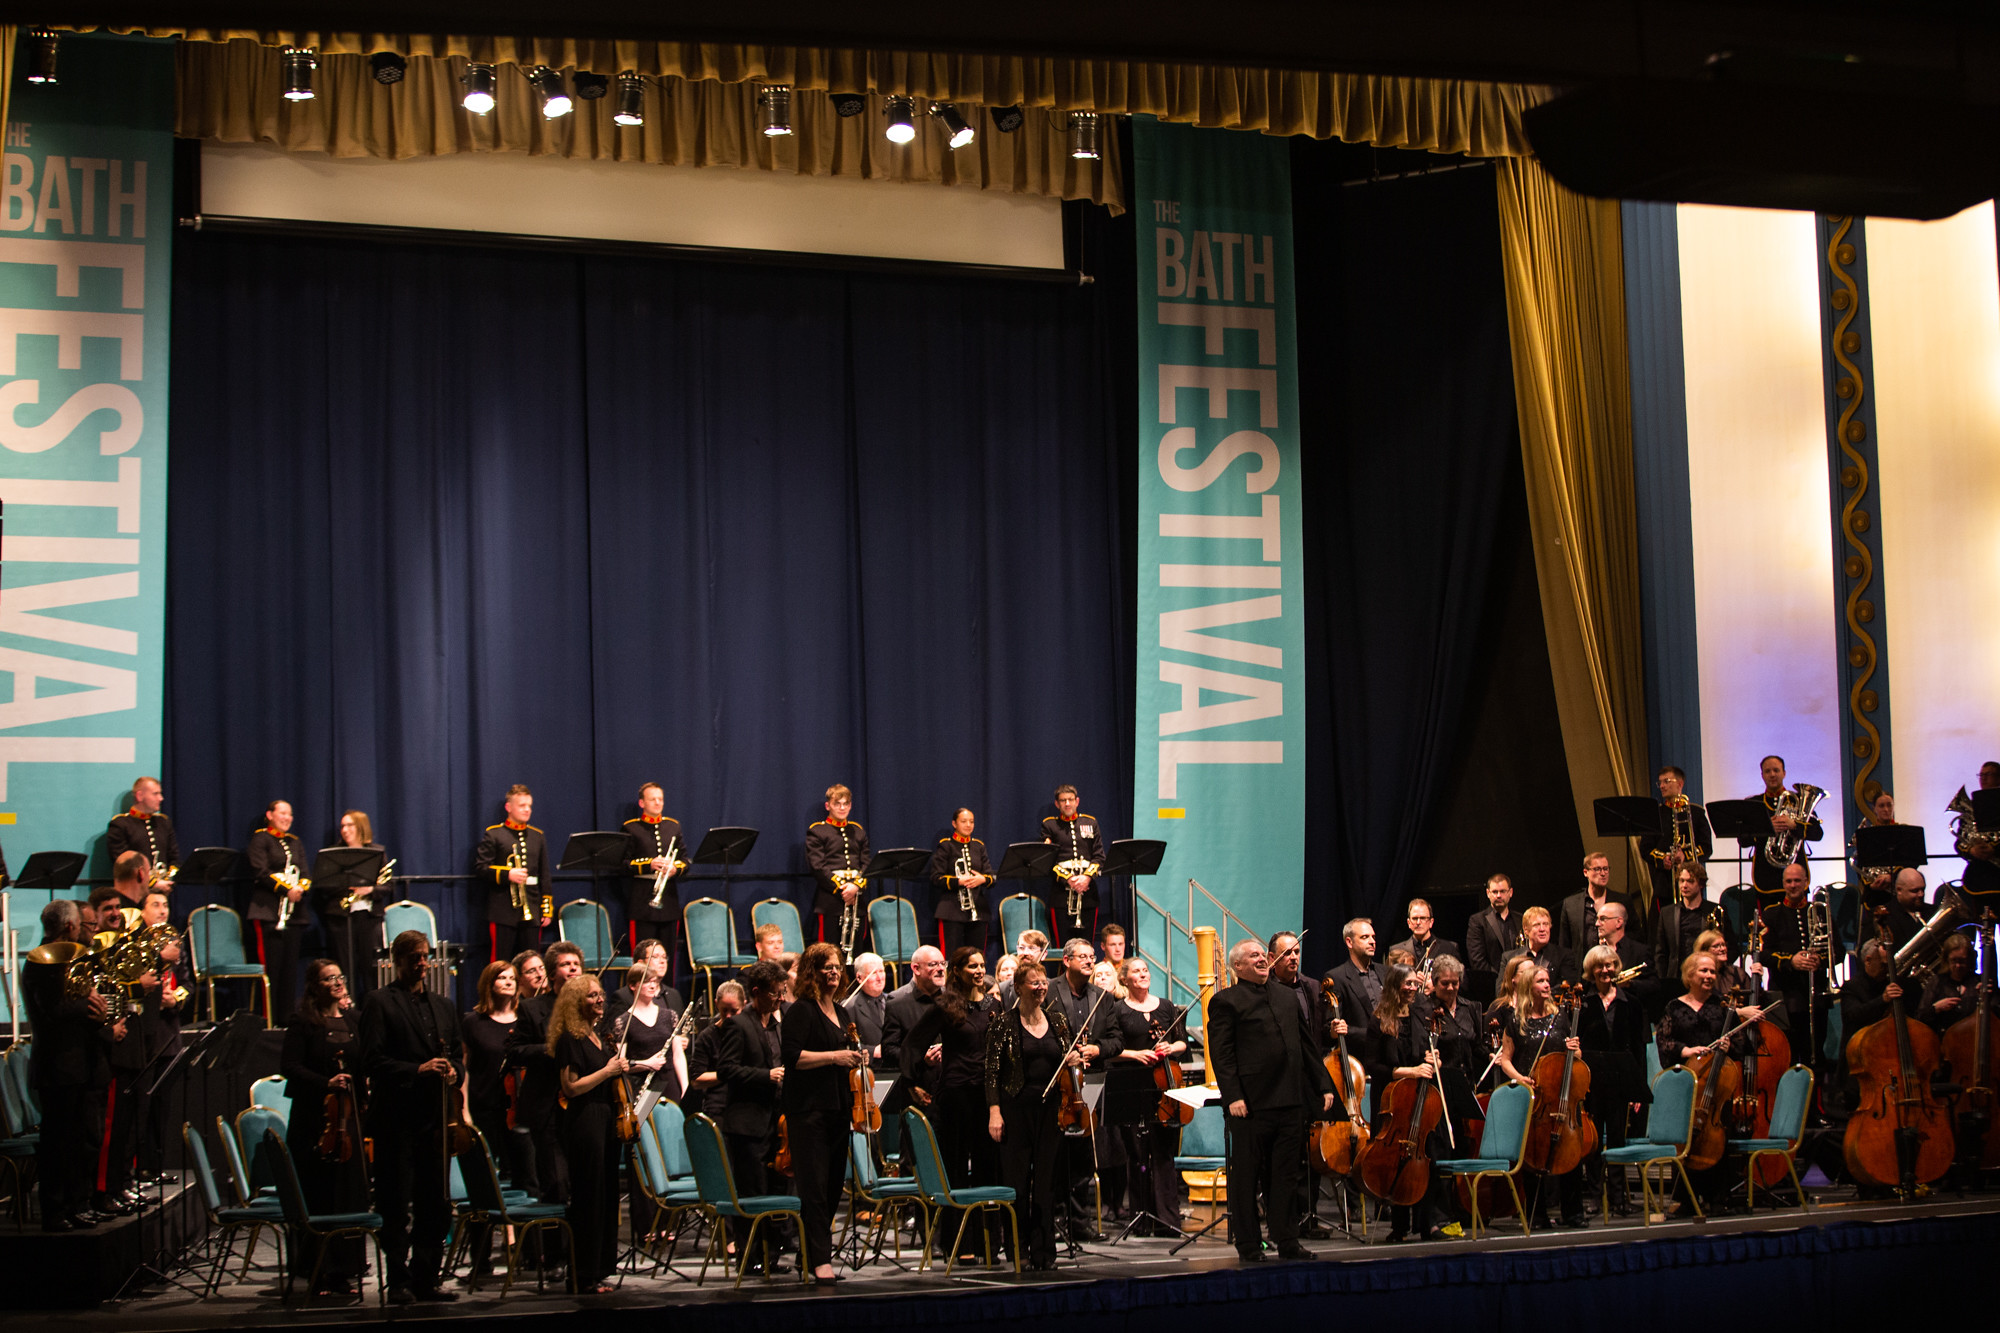 Bath Philharmonia performing onstage at the Forum